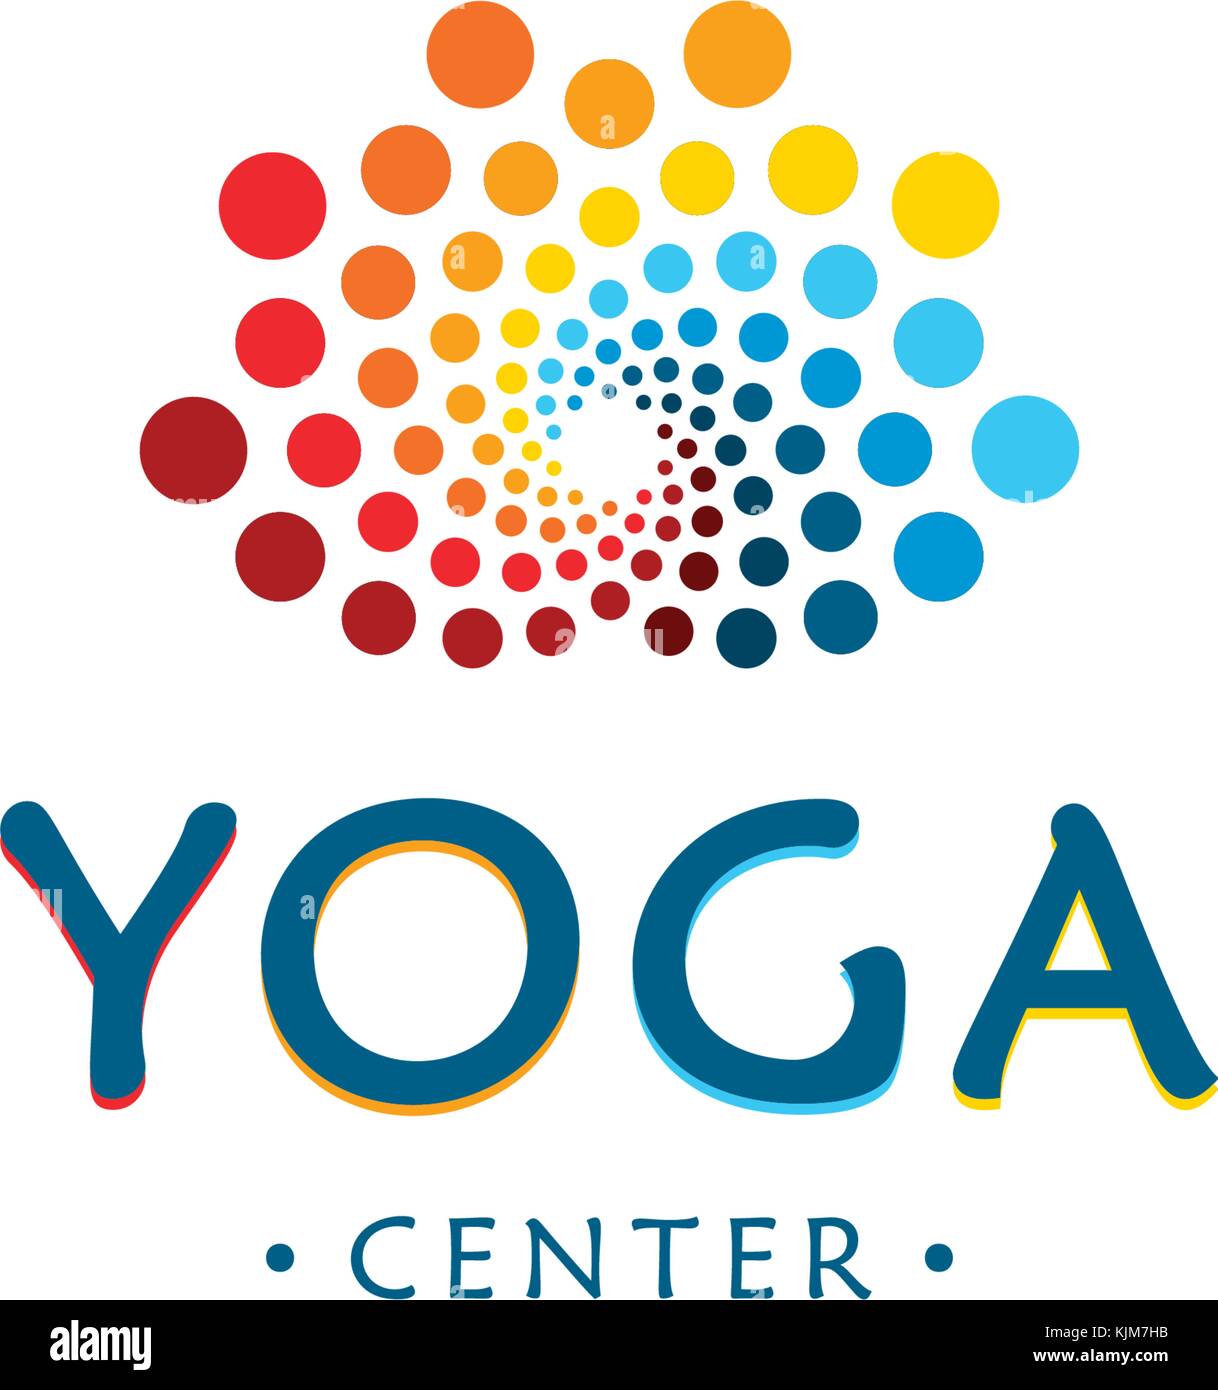 Yoga center logo. Abstract lotus beauty flower. Round digital shape. Colorful circles vector logotype. Stock Vector